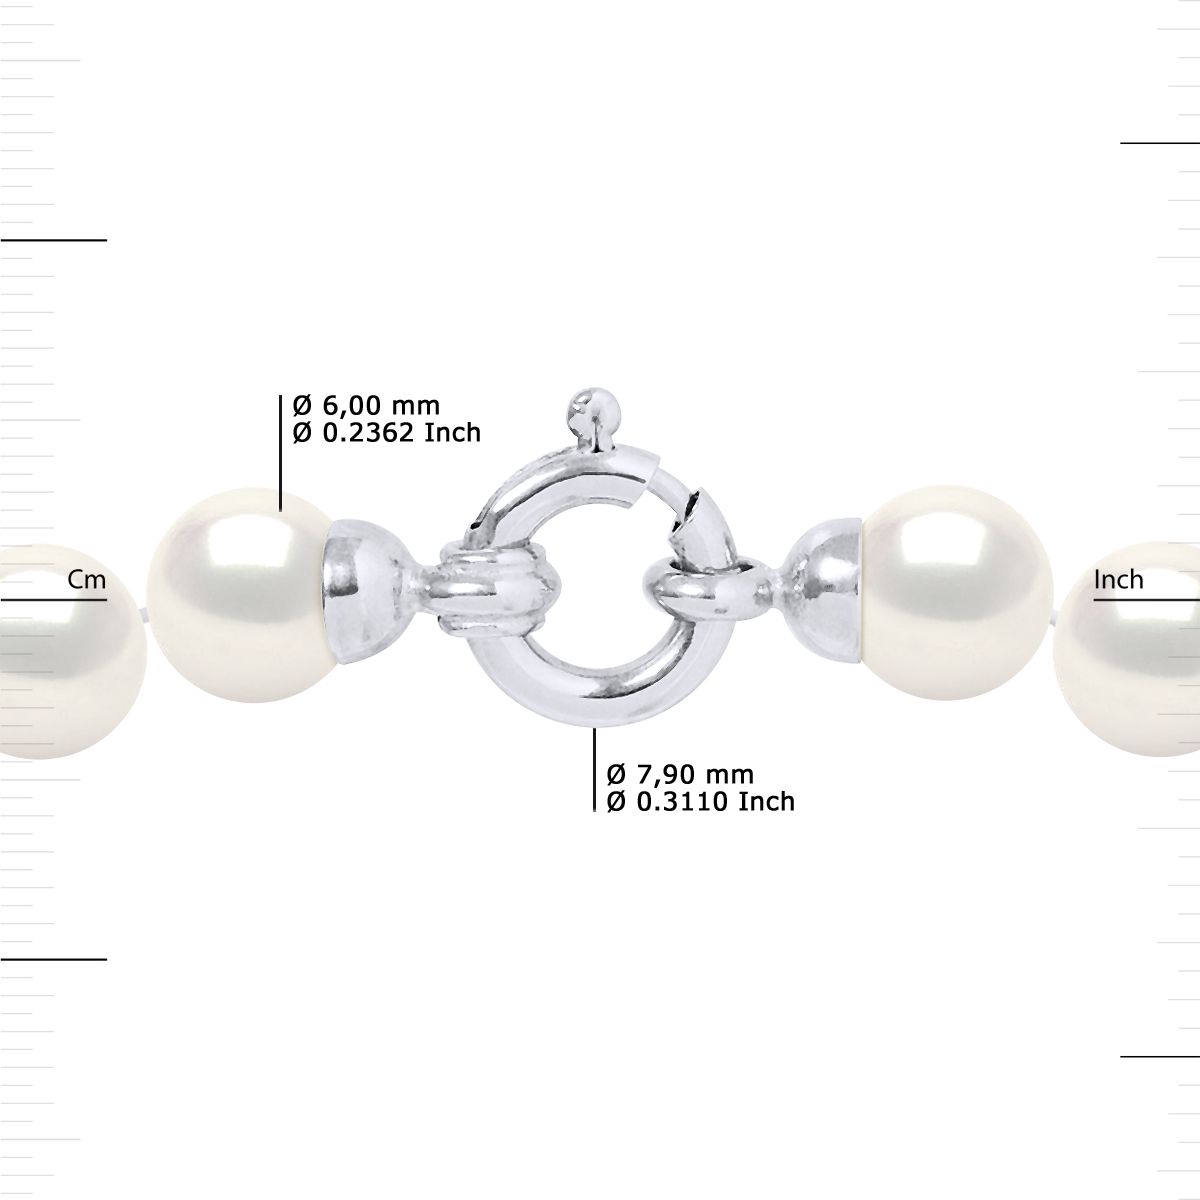 Necklace Rang Princesse true Cultured Freshwater Pearls 6-7 mm - 0,24 in - Natural White Color ring clasp White Gold 375 
- Length 42 cm , 16,5 in - Our jewellery is made in France and will be delivered in a gift box accompanied by a Certificate of Authenticity and International Warranty